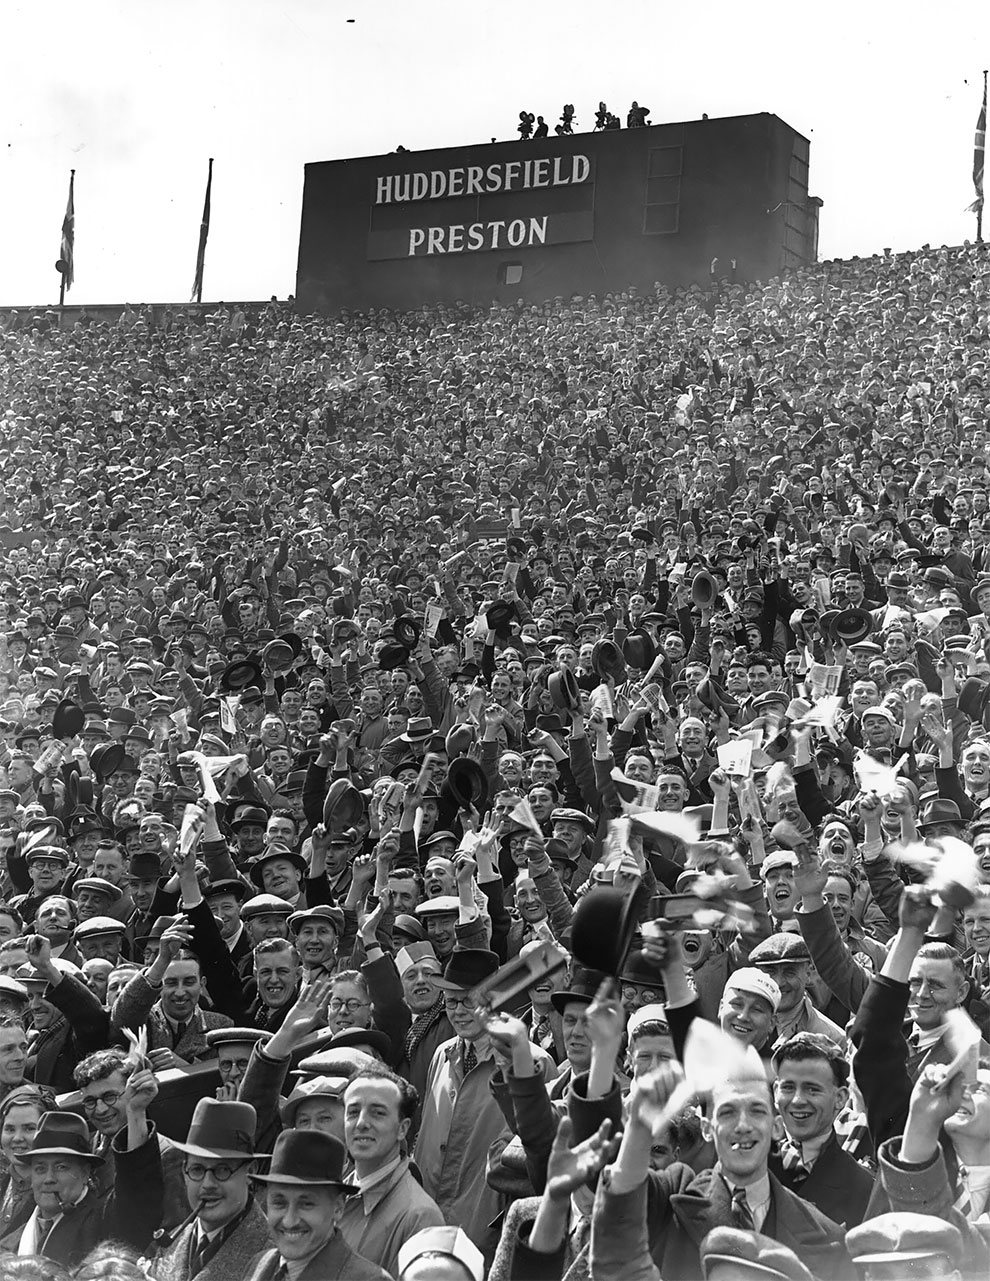 Stunning Vintage Photo Of British Football Fans From The 1900s To 1940s Design You Trust